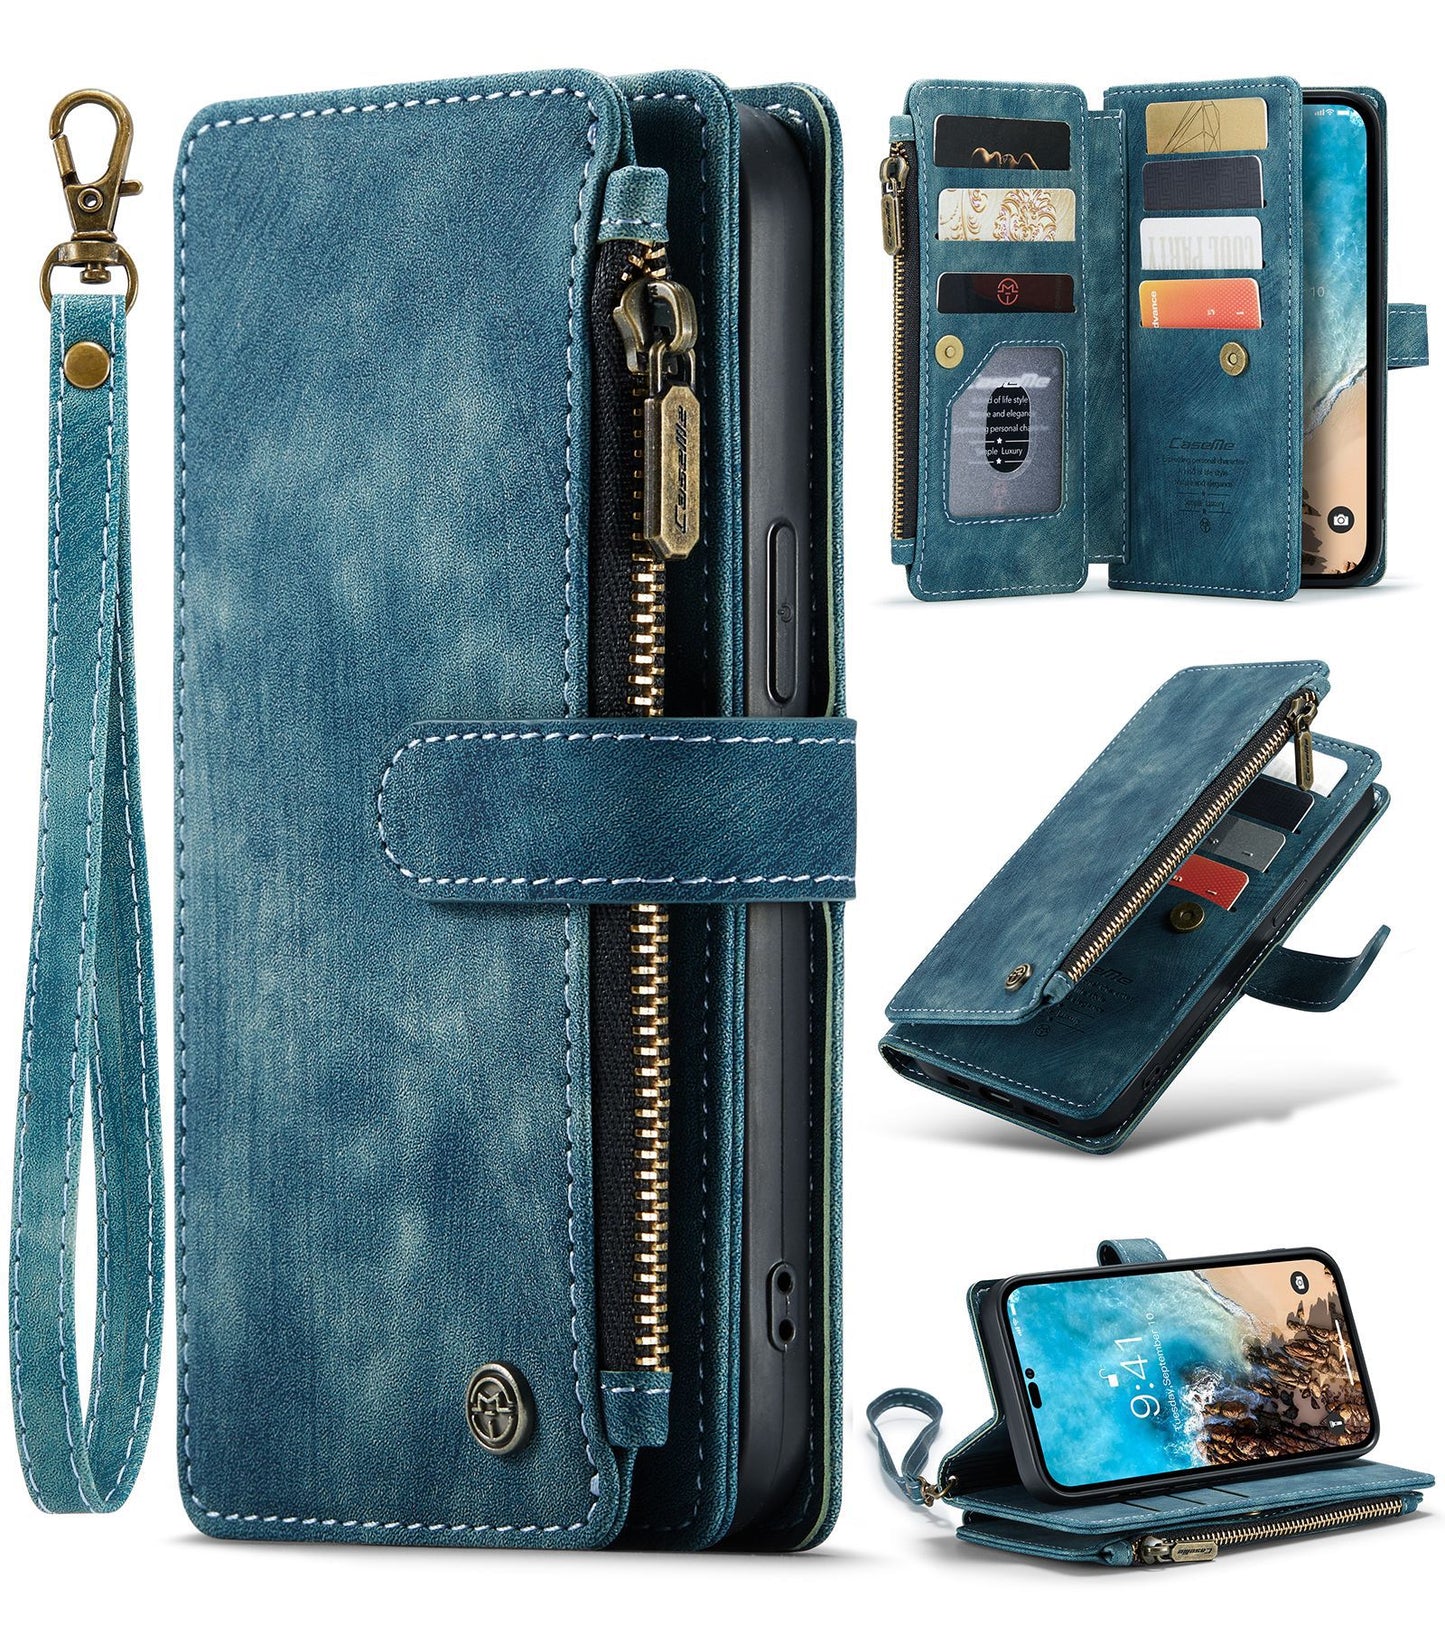 Protective Leather Case and Wallet for iPhone